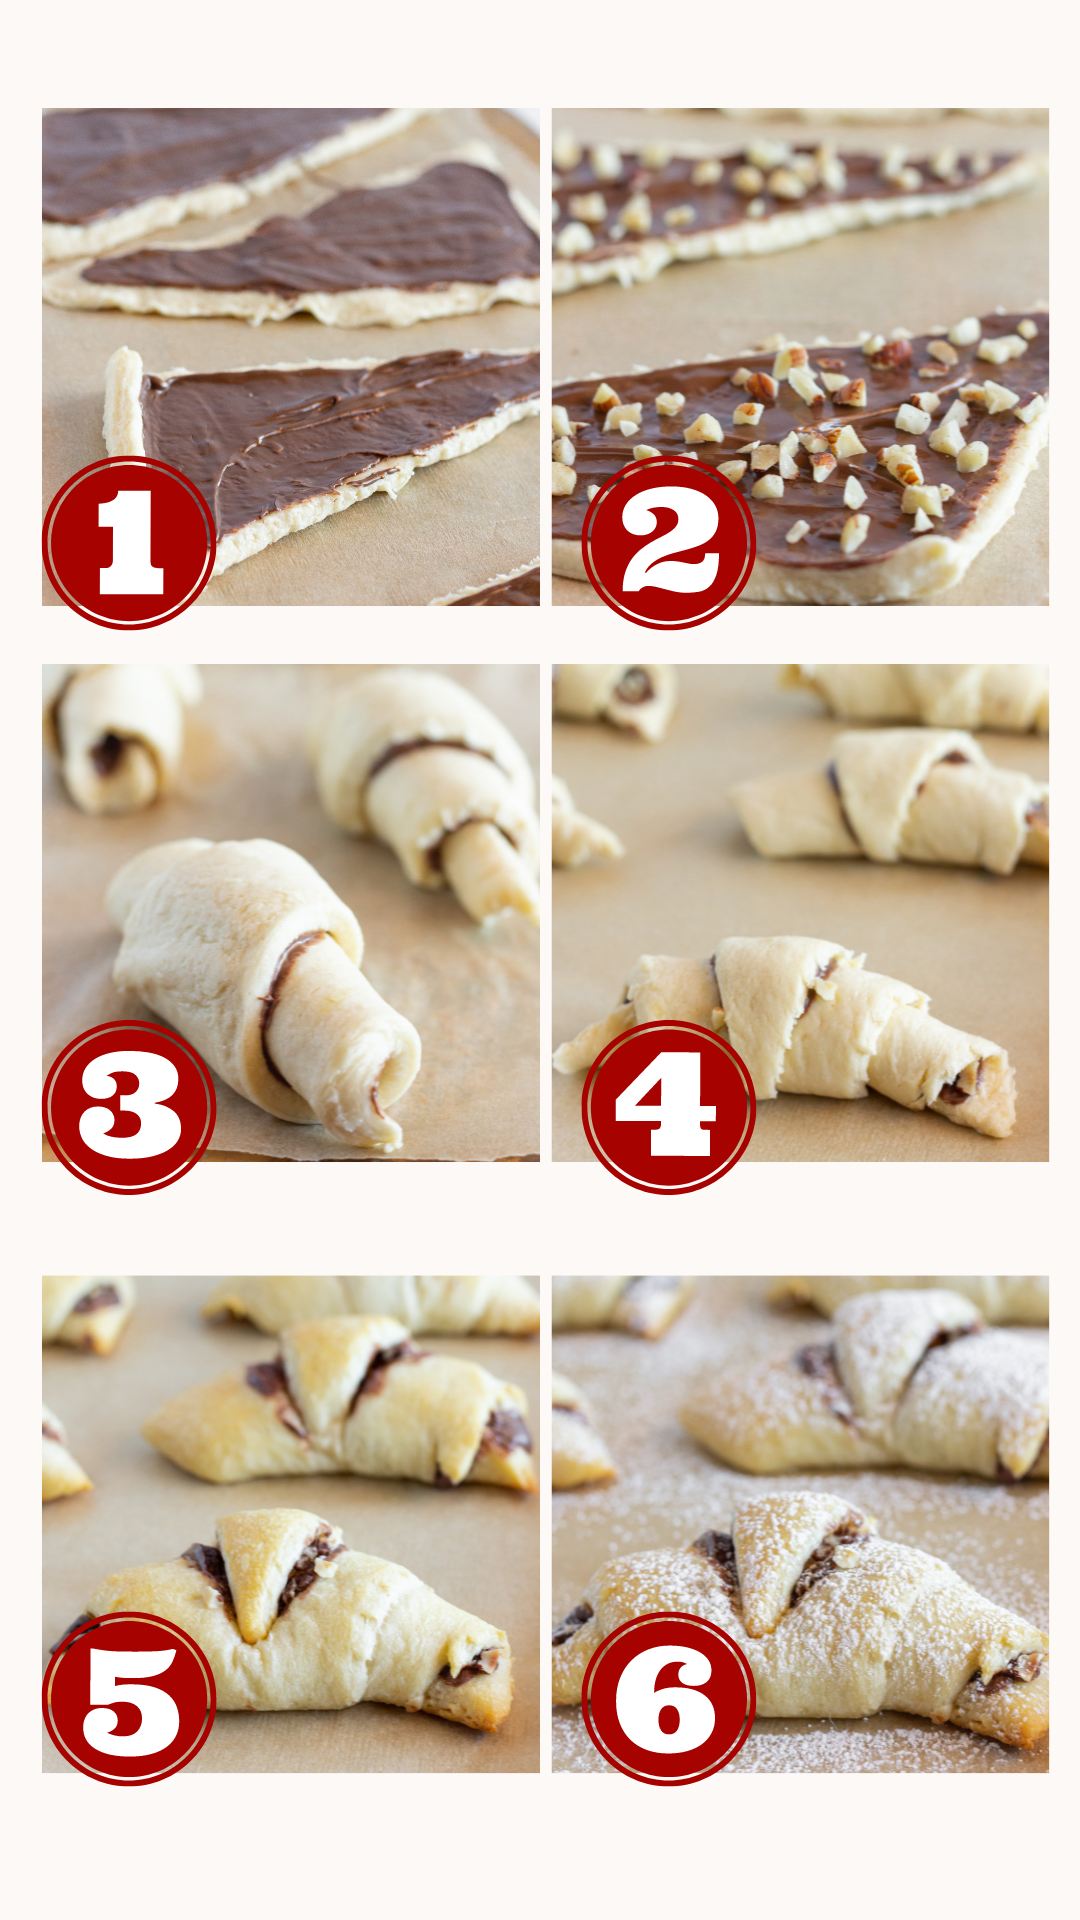 Steps for making Easy Nutella Crescent Rolls, by Top US food blog Practically Homemade